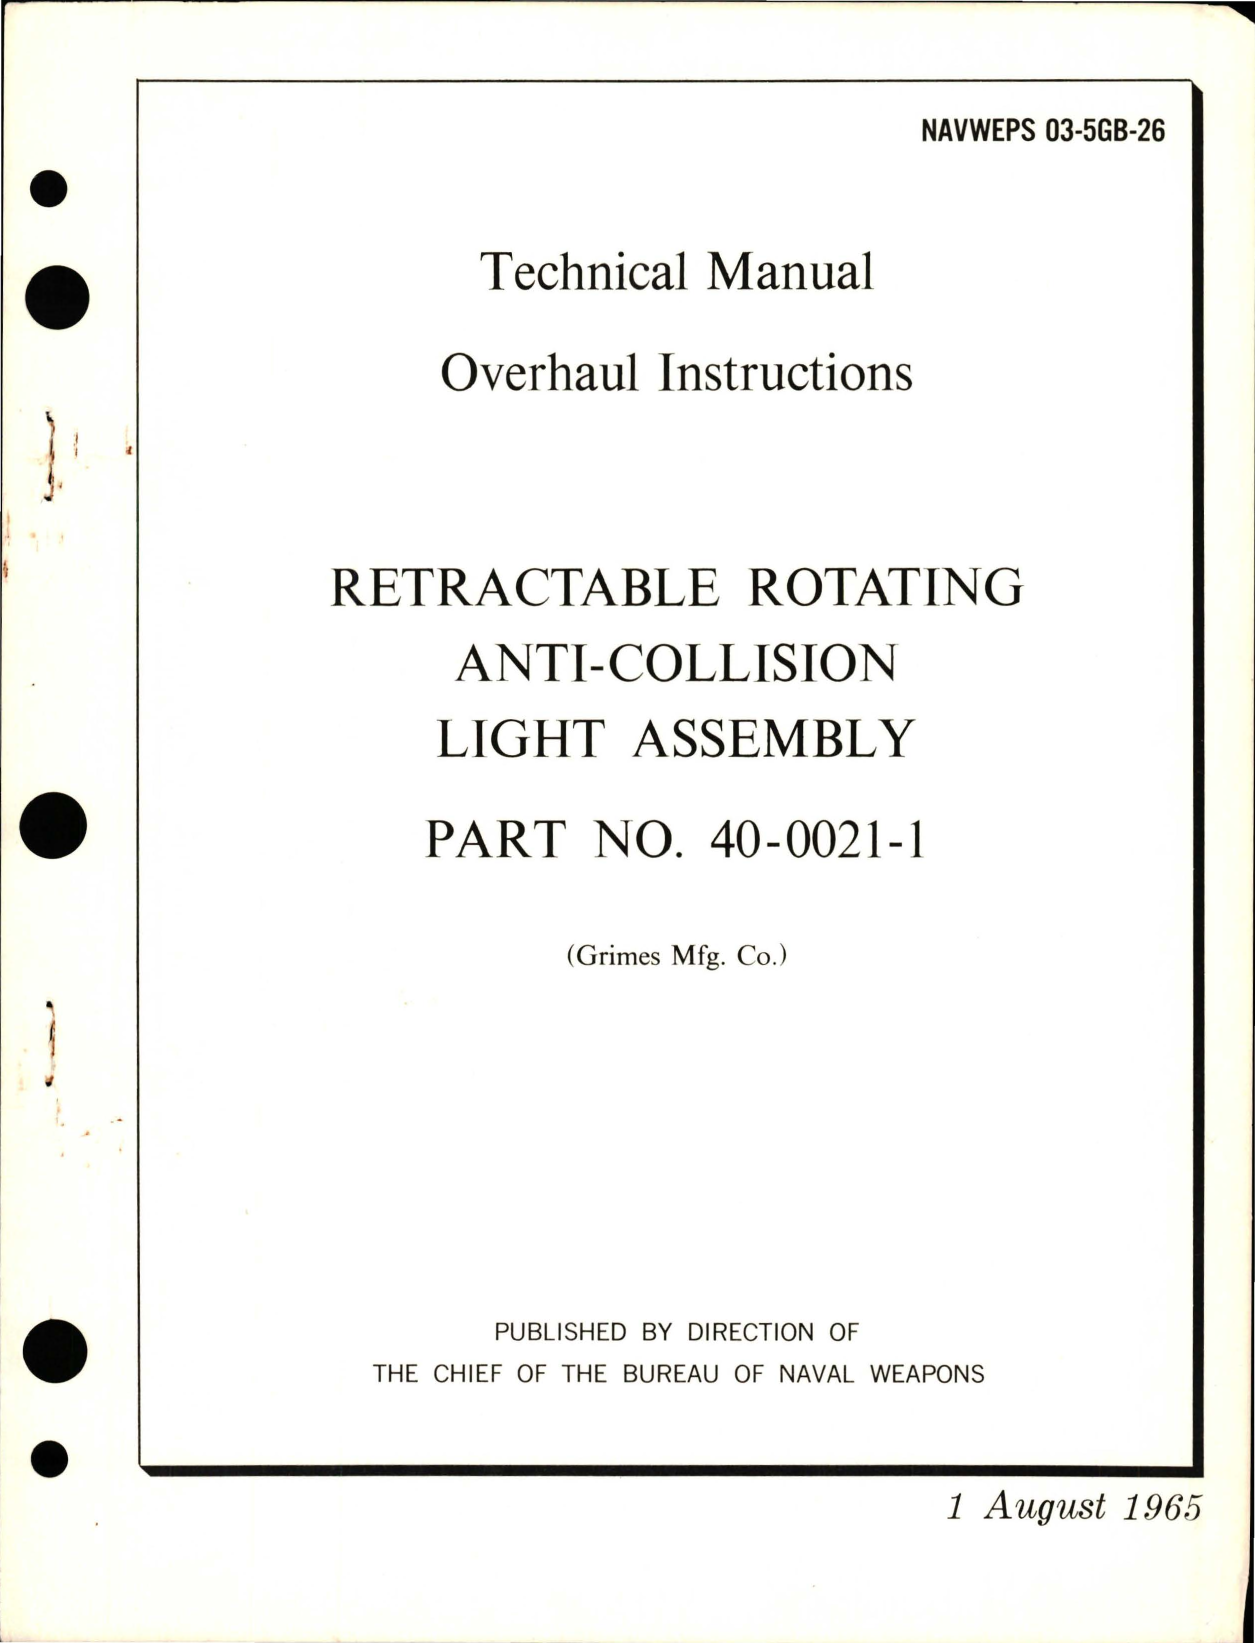 Sample page 1 from AirCorps Library document: Overhaul Instructions for Retractable Rotating Anti-Collision Light Assembly - Part 40-0021-1